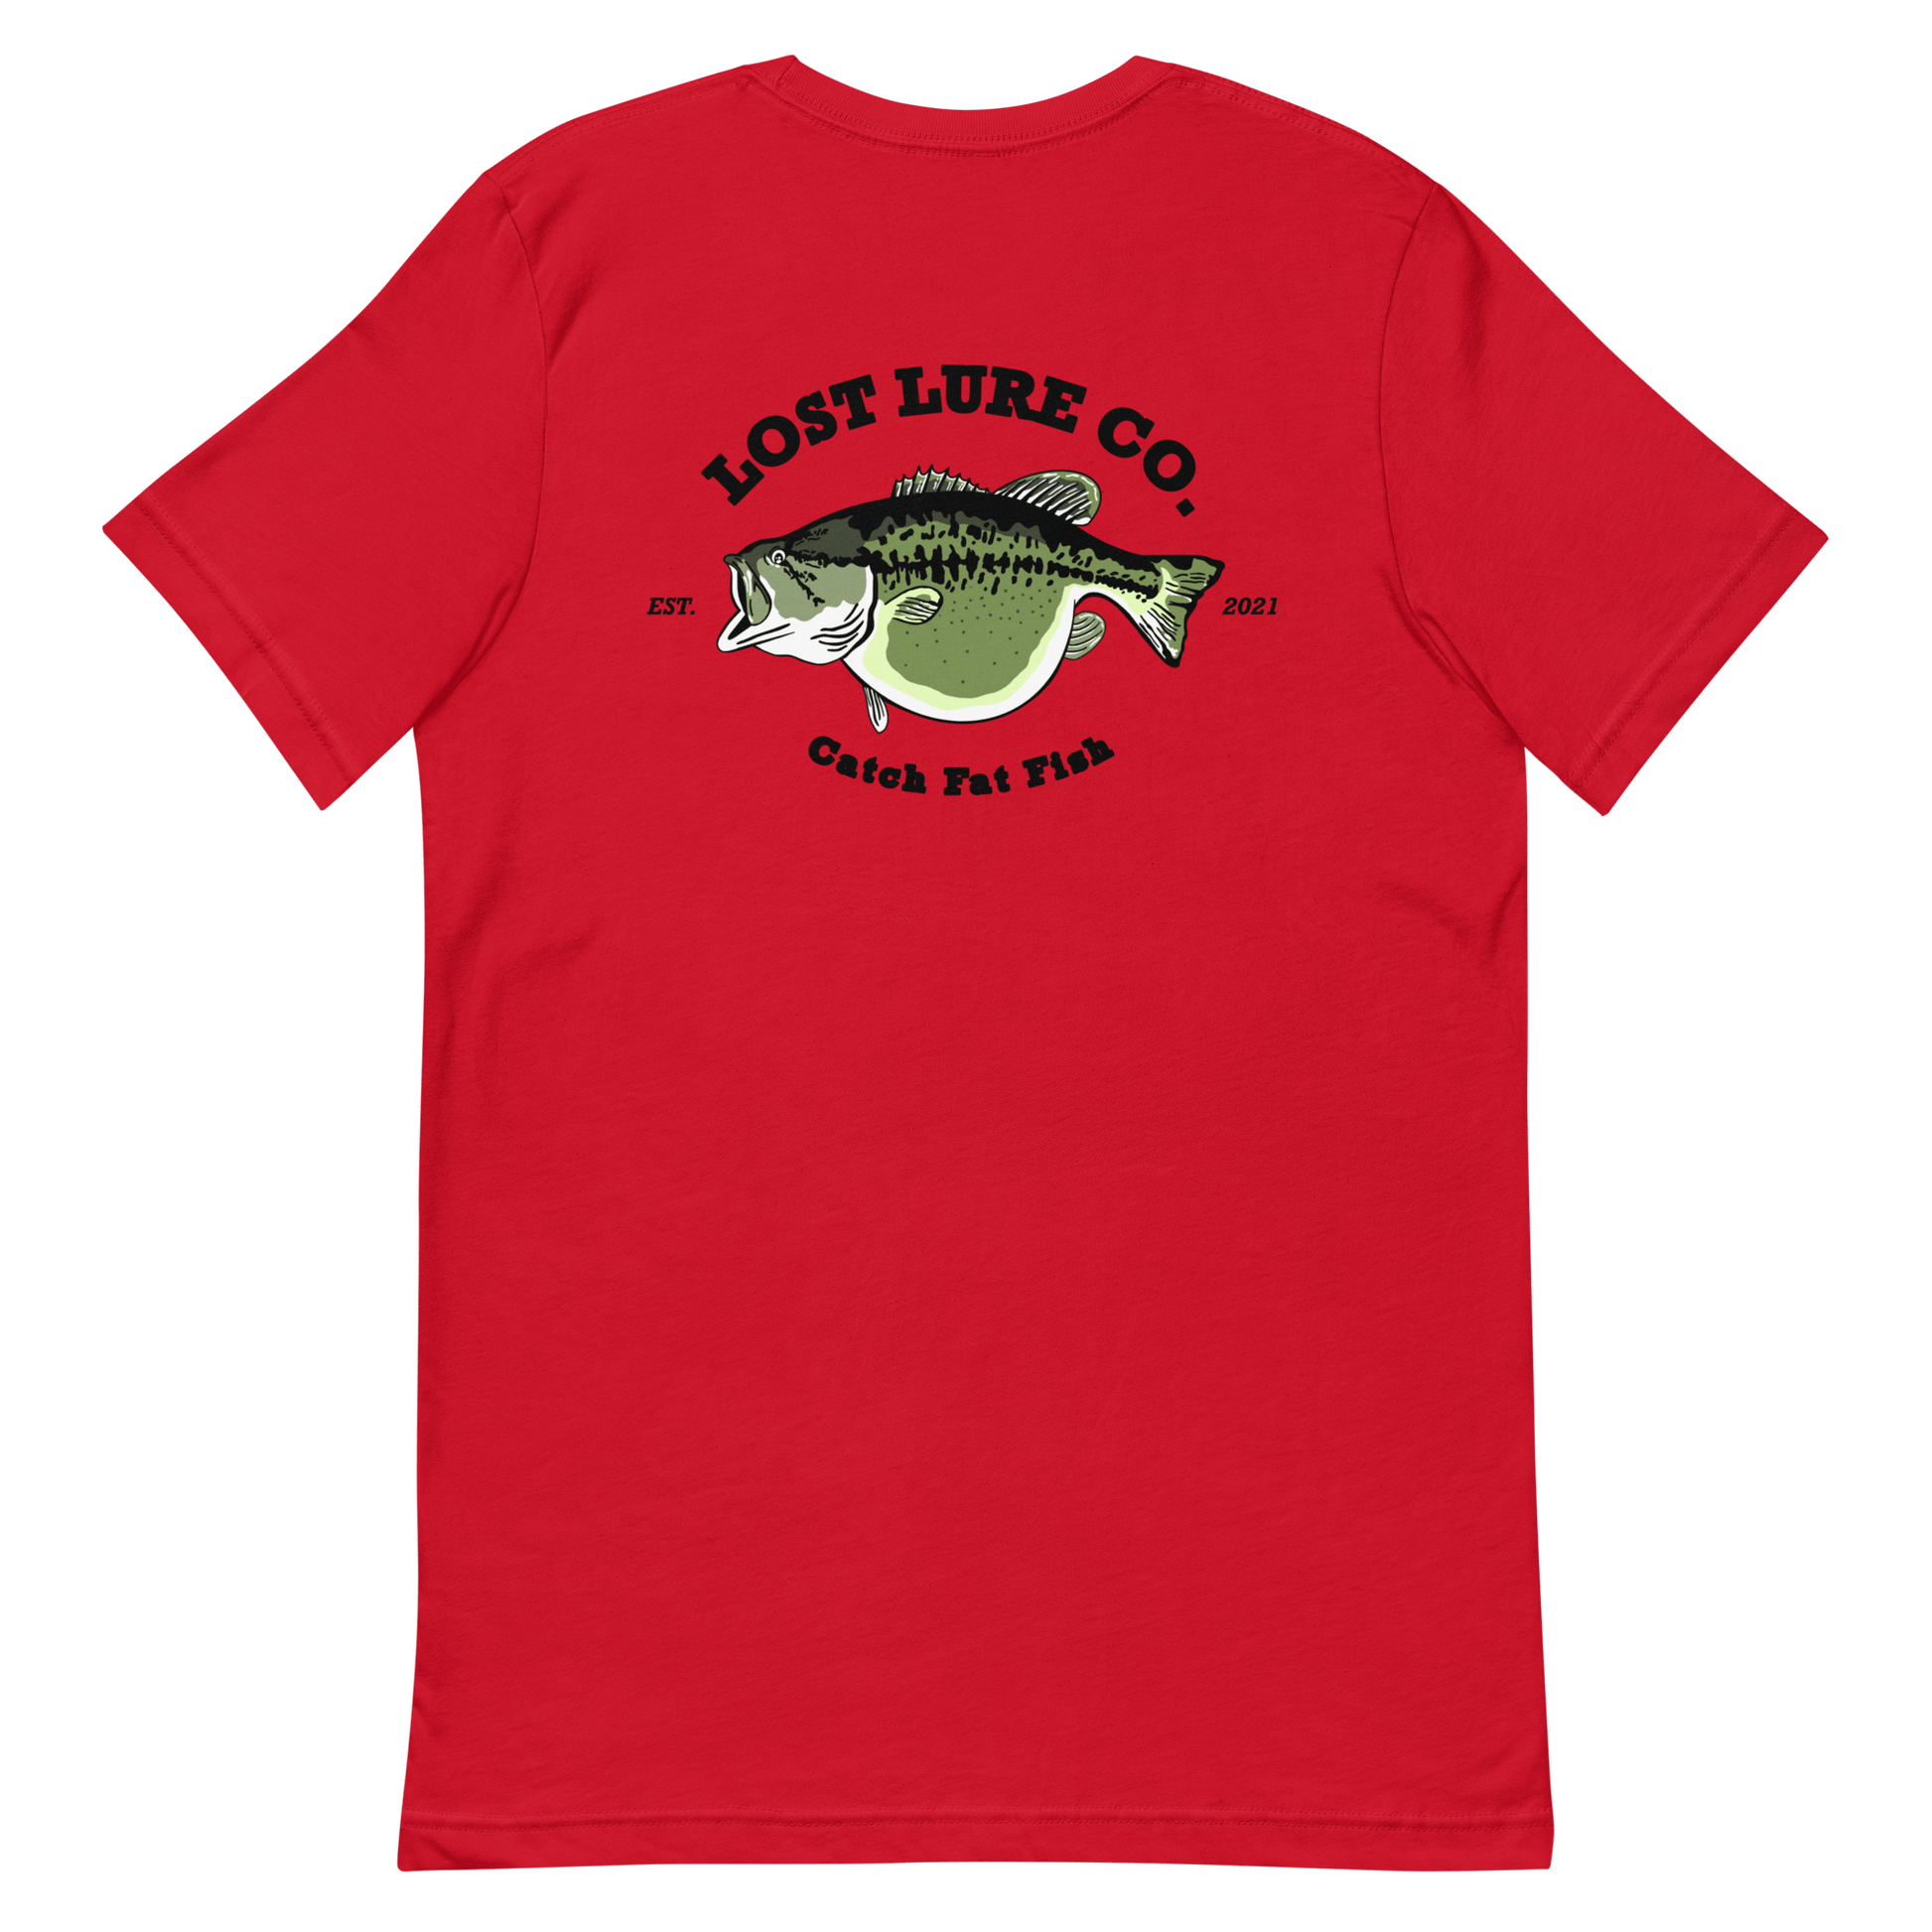 Bass fishing shirt. It has a drawing of a fat bass and it reads “lost lure co, catch fat fish”. The bass design is on the back, the lost lure logo is on the front. Red shirt, front side 